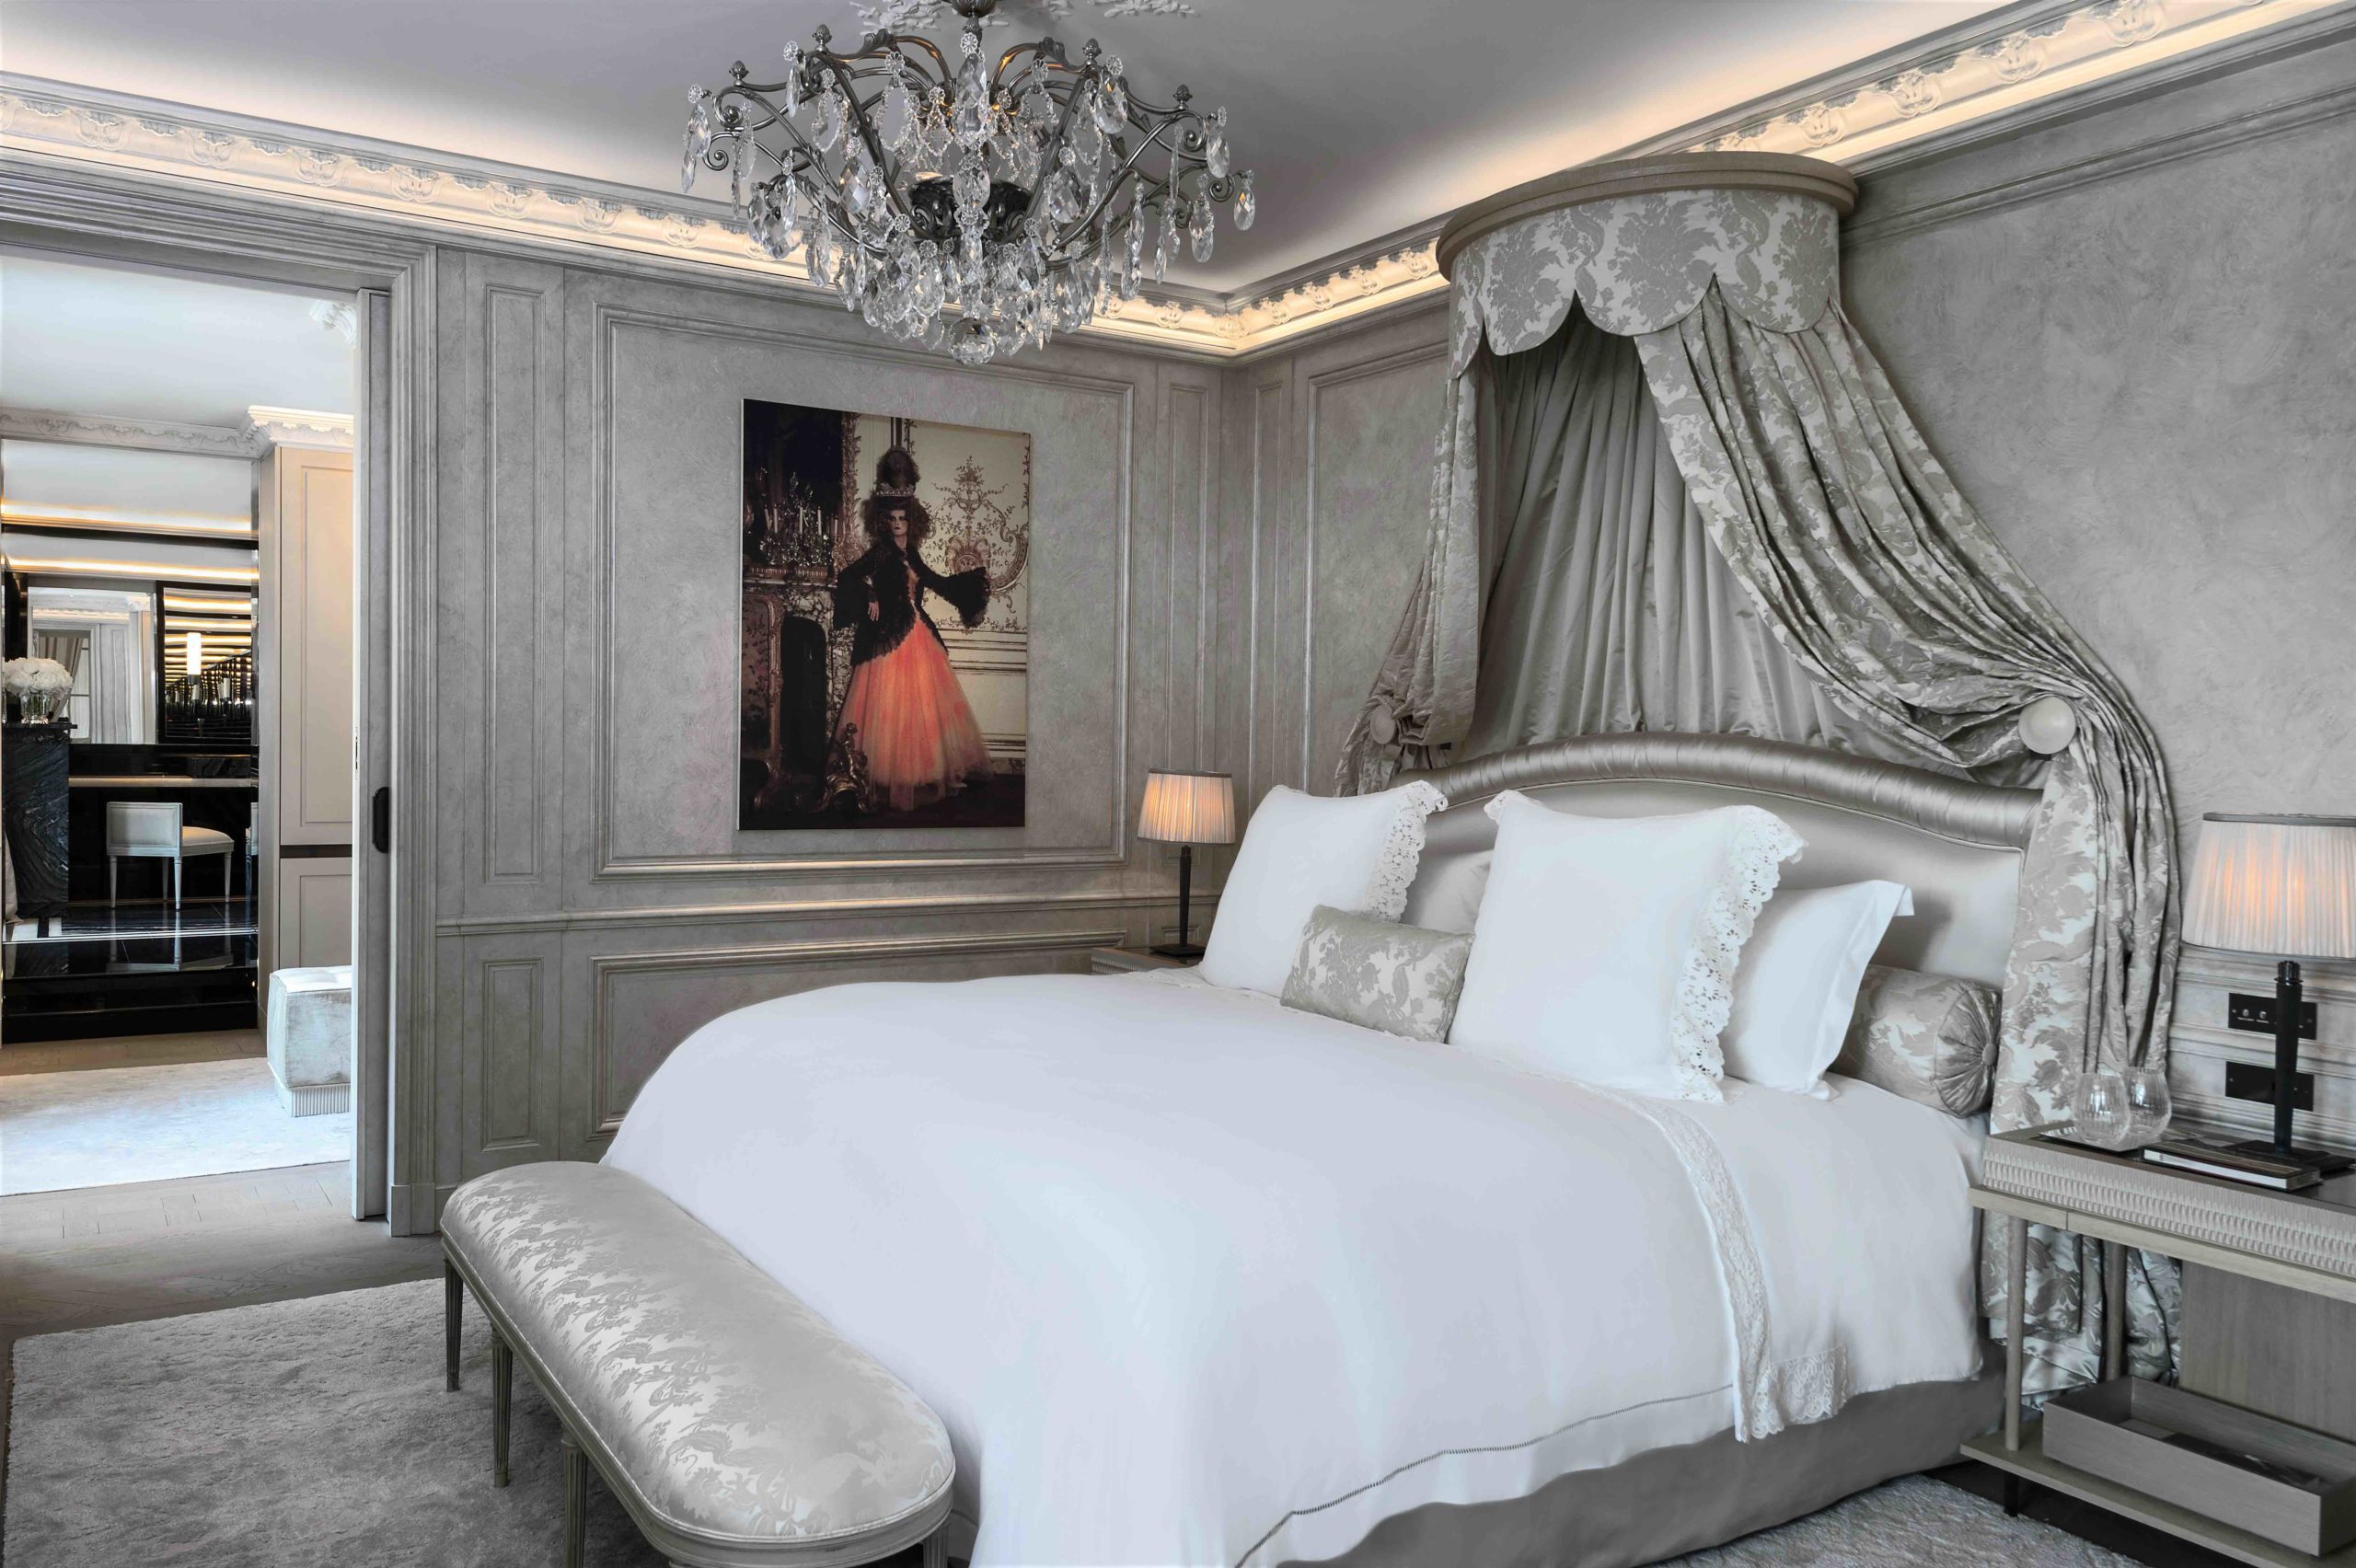 6. Grand Appartement Eiffel - Bed room